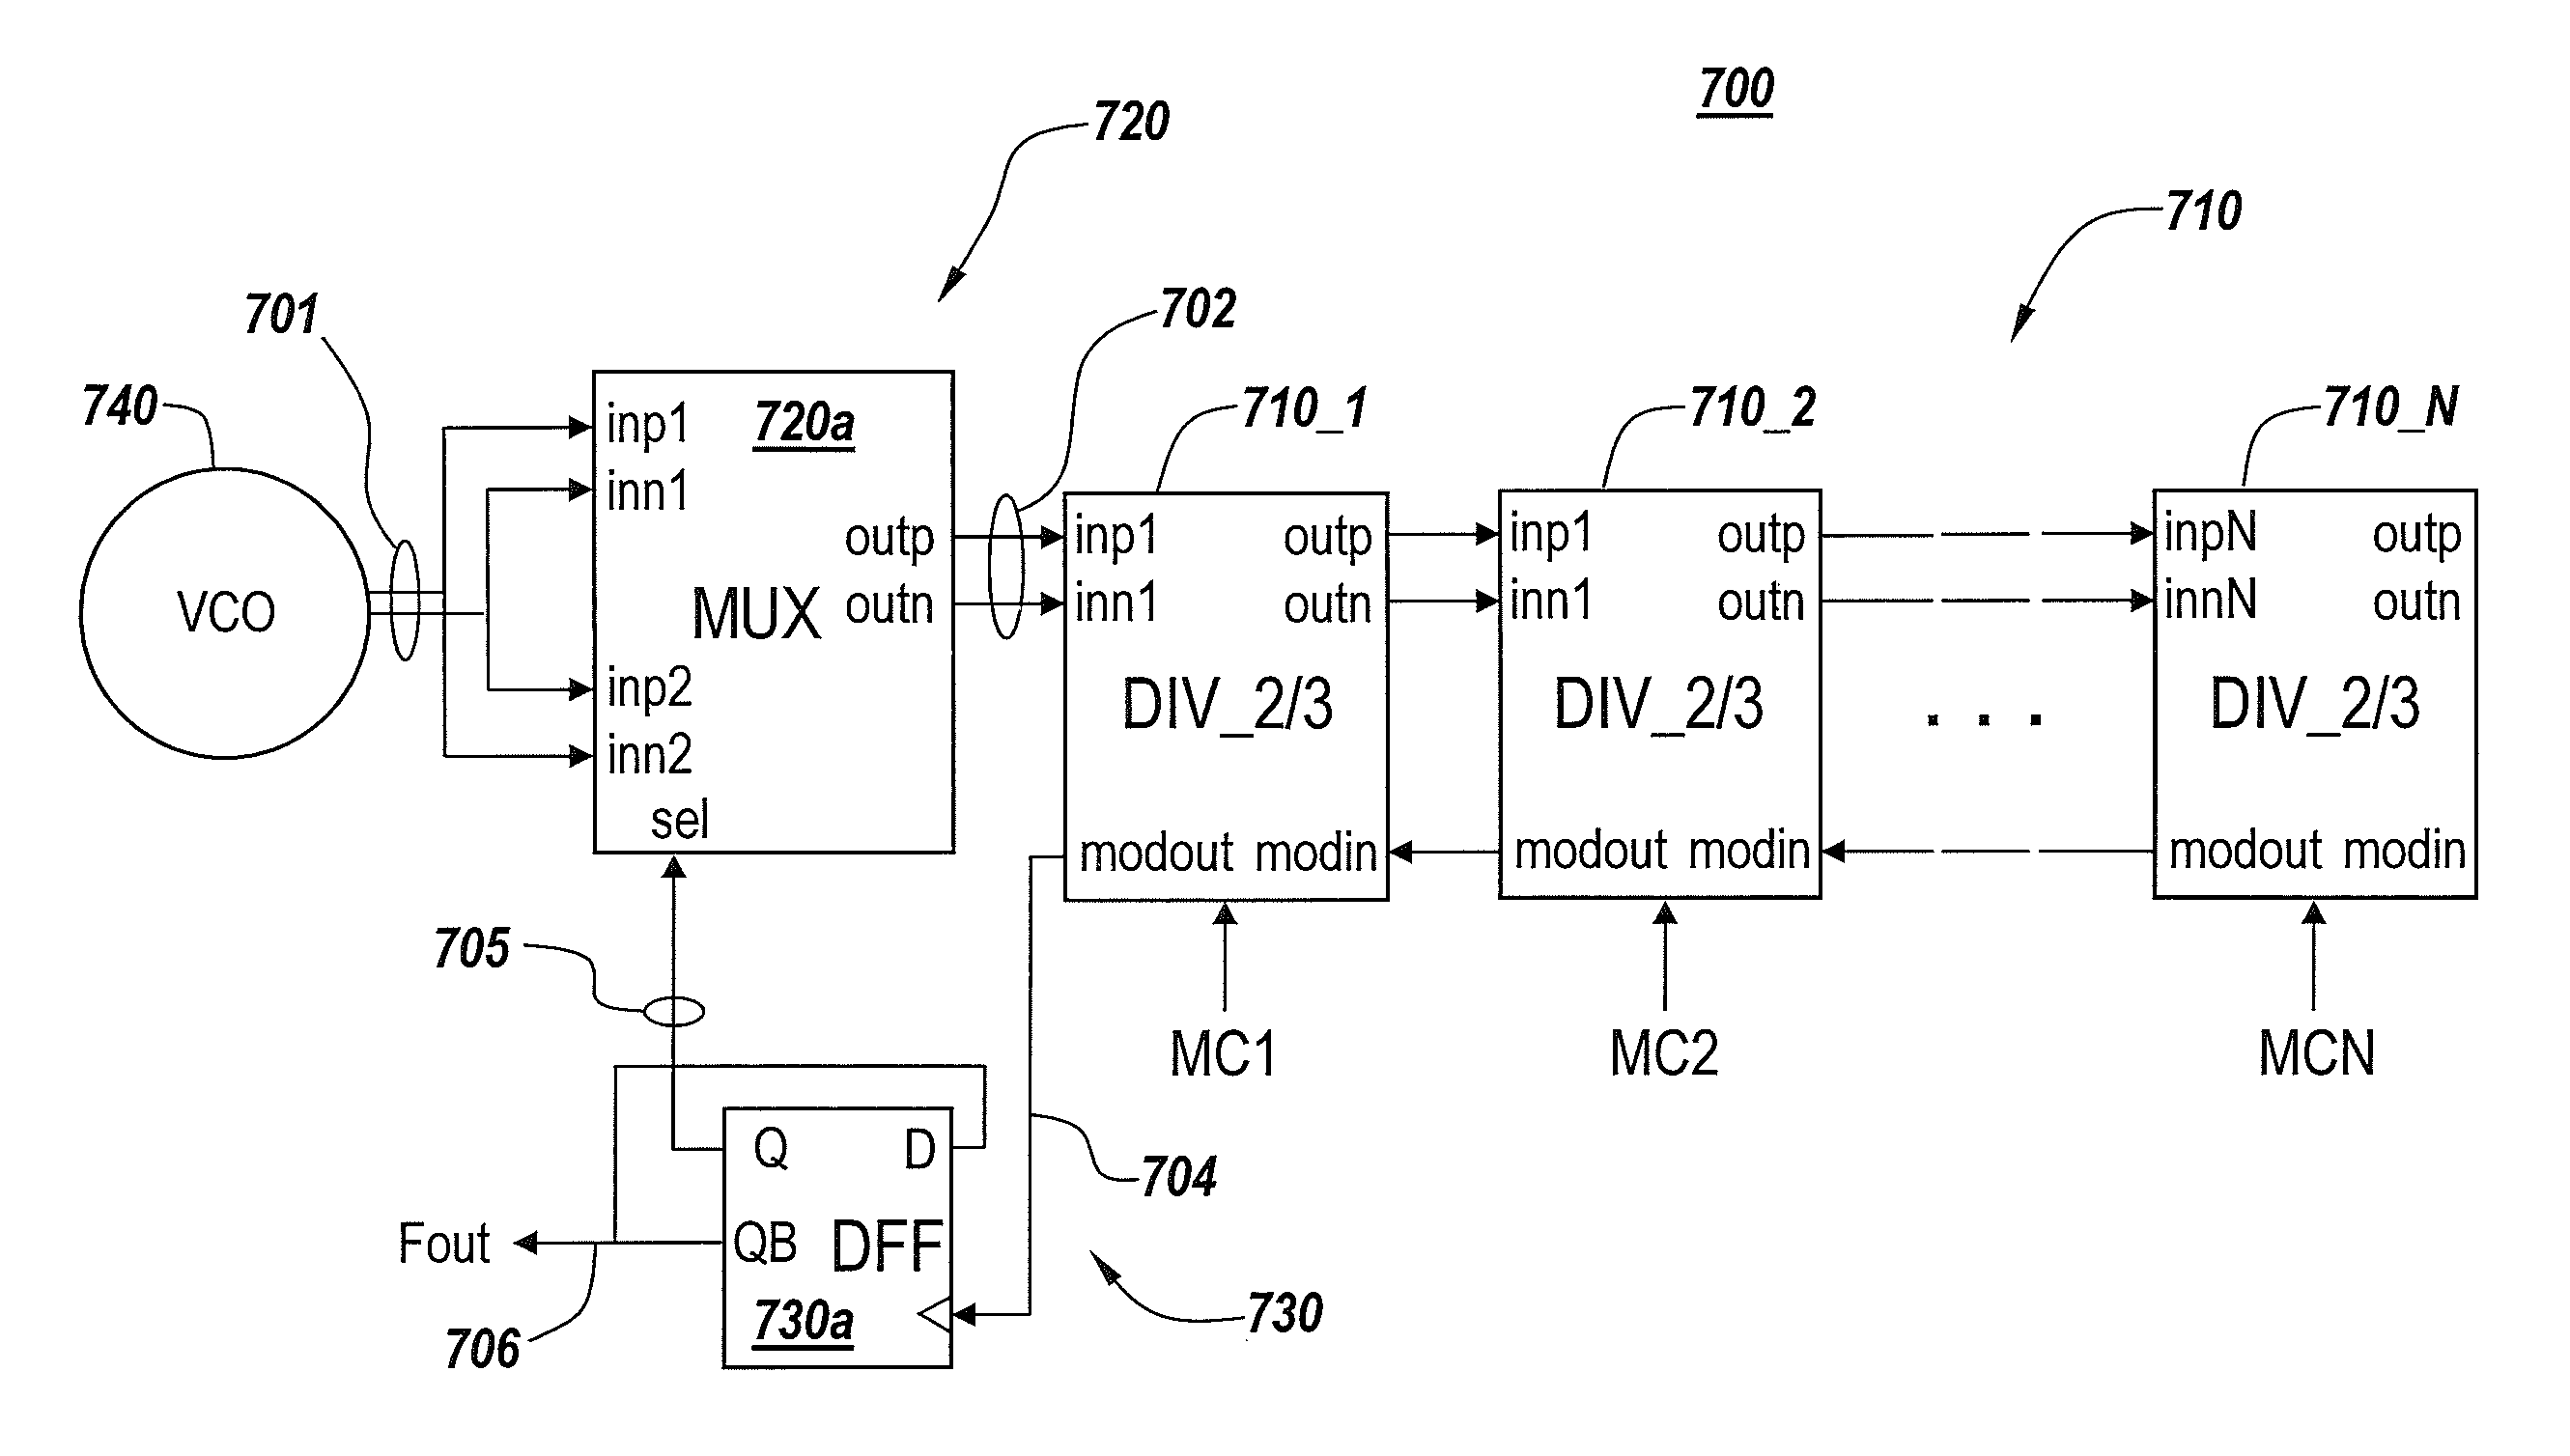 Half-integer frequency dividers that support 50% duty cycle signal generation